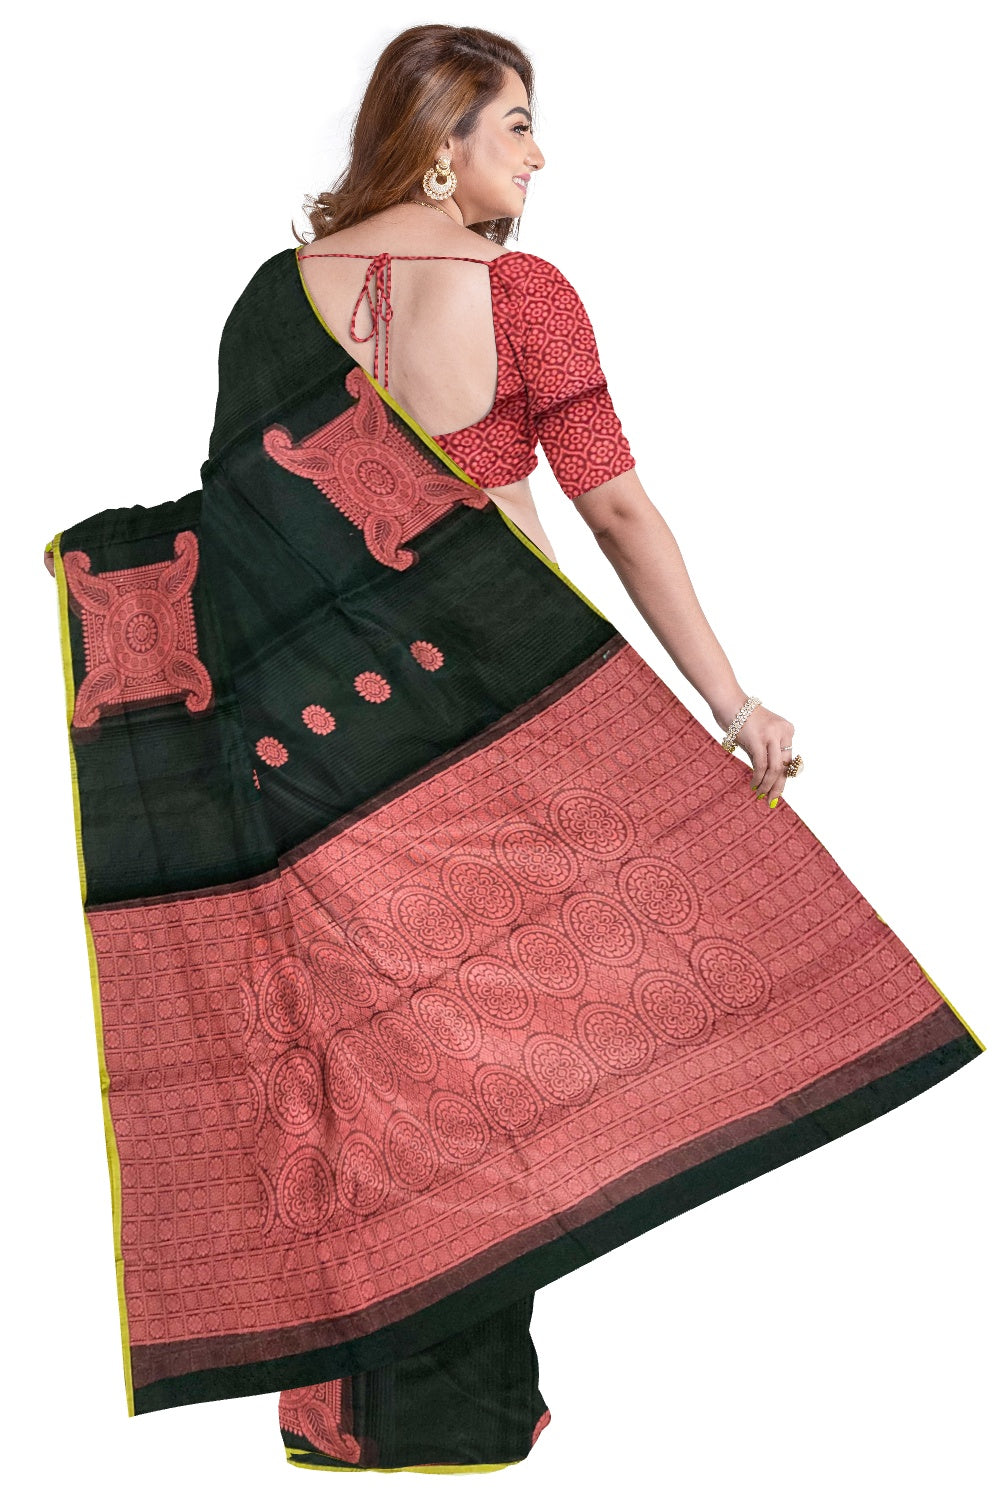 Southloom Sico Gadwal Semi Silk Saree in Black and Pink with Floral Motifs (Blouse Piece with Work)